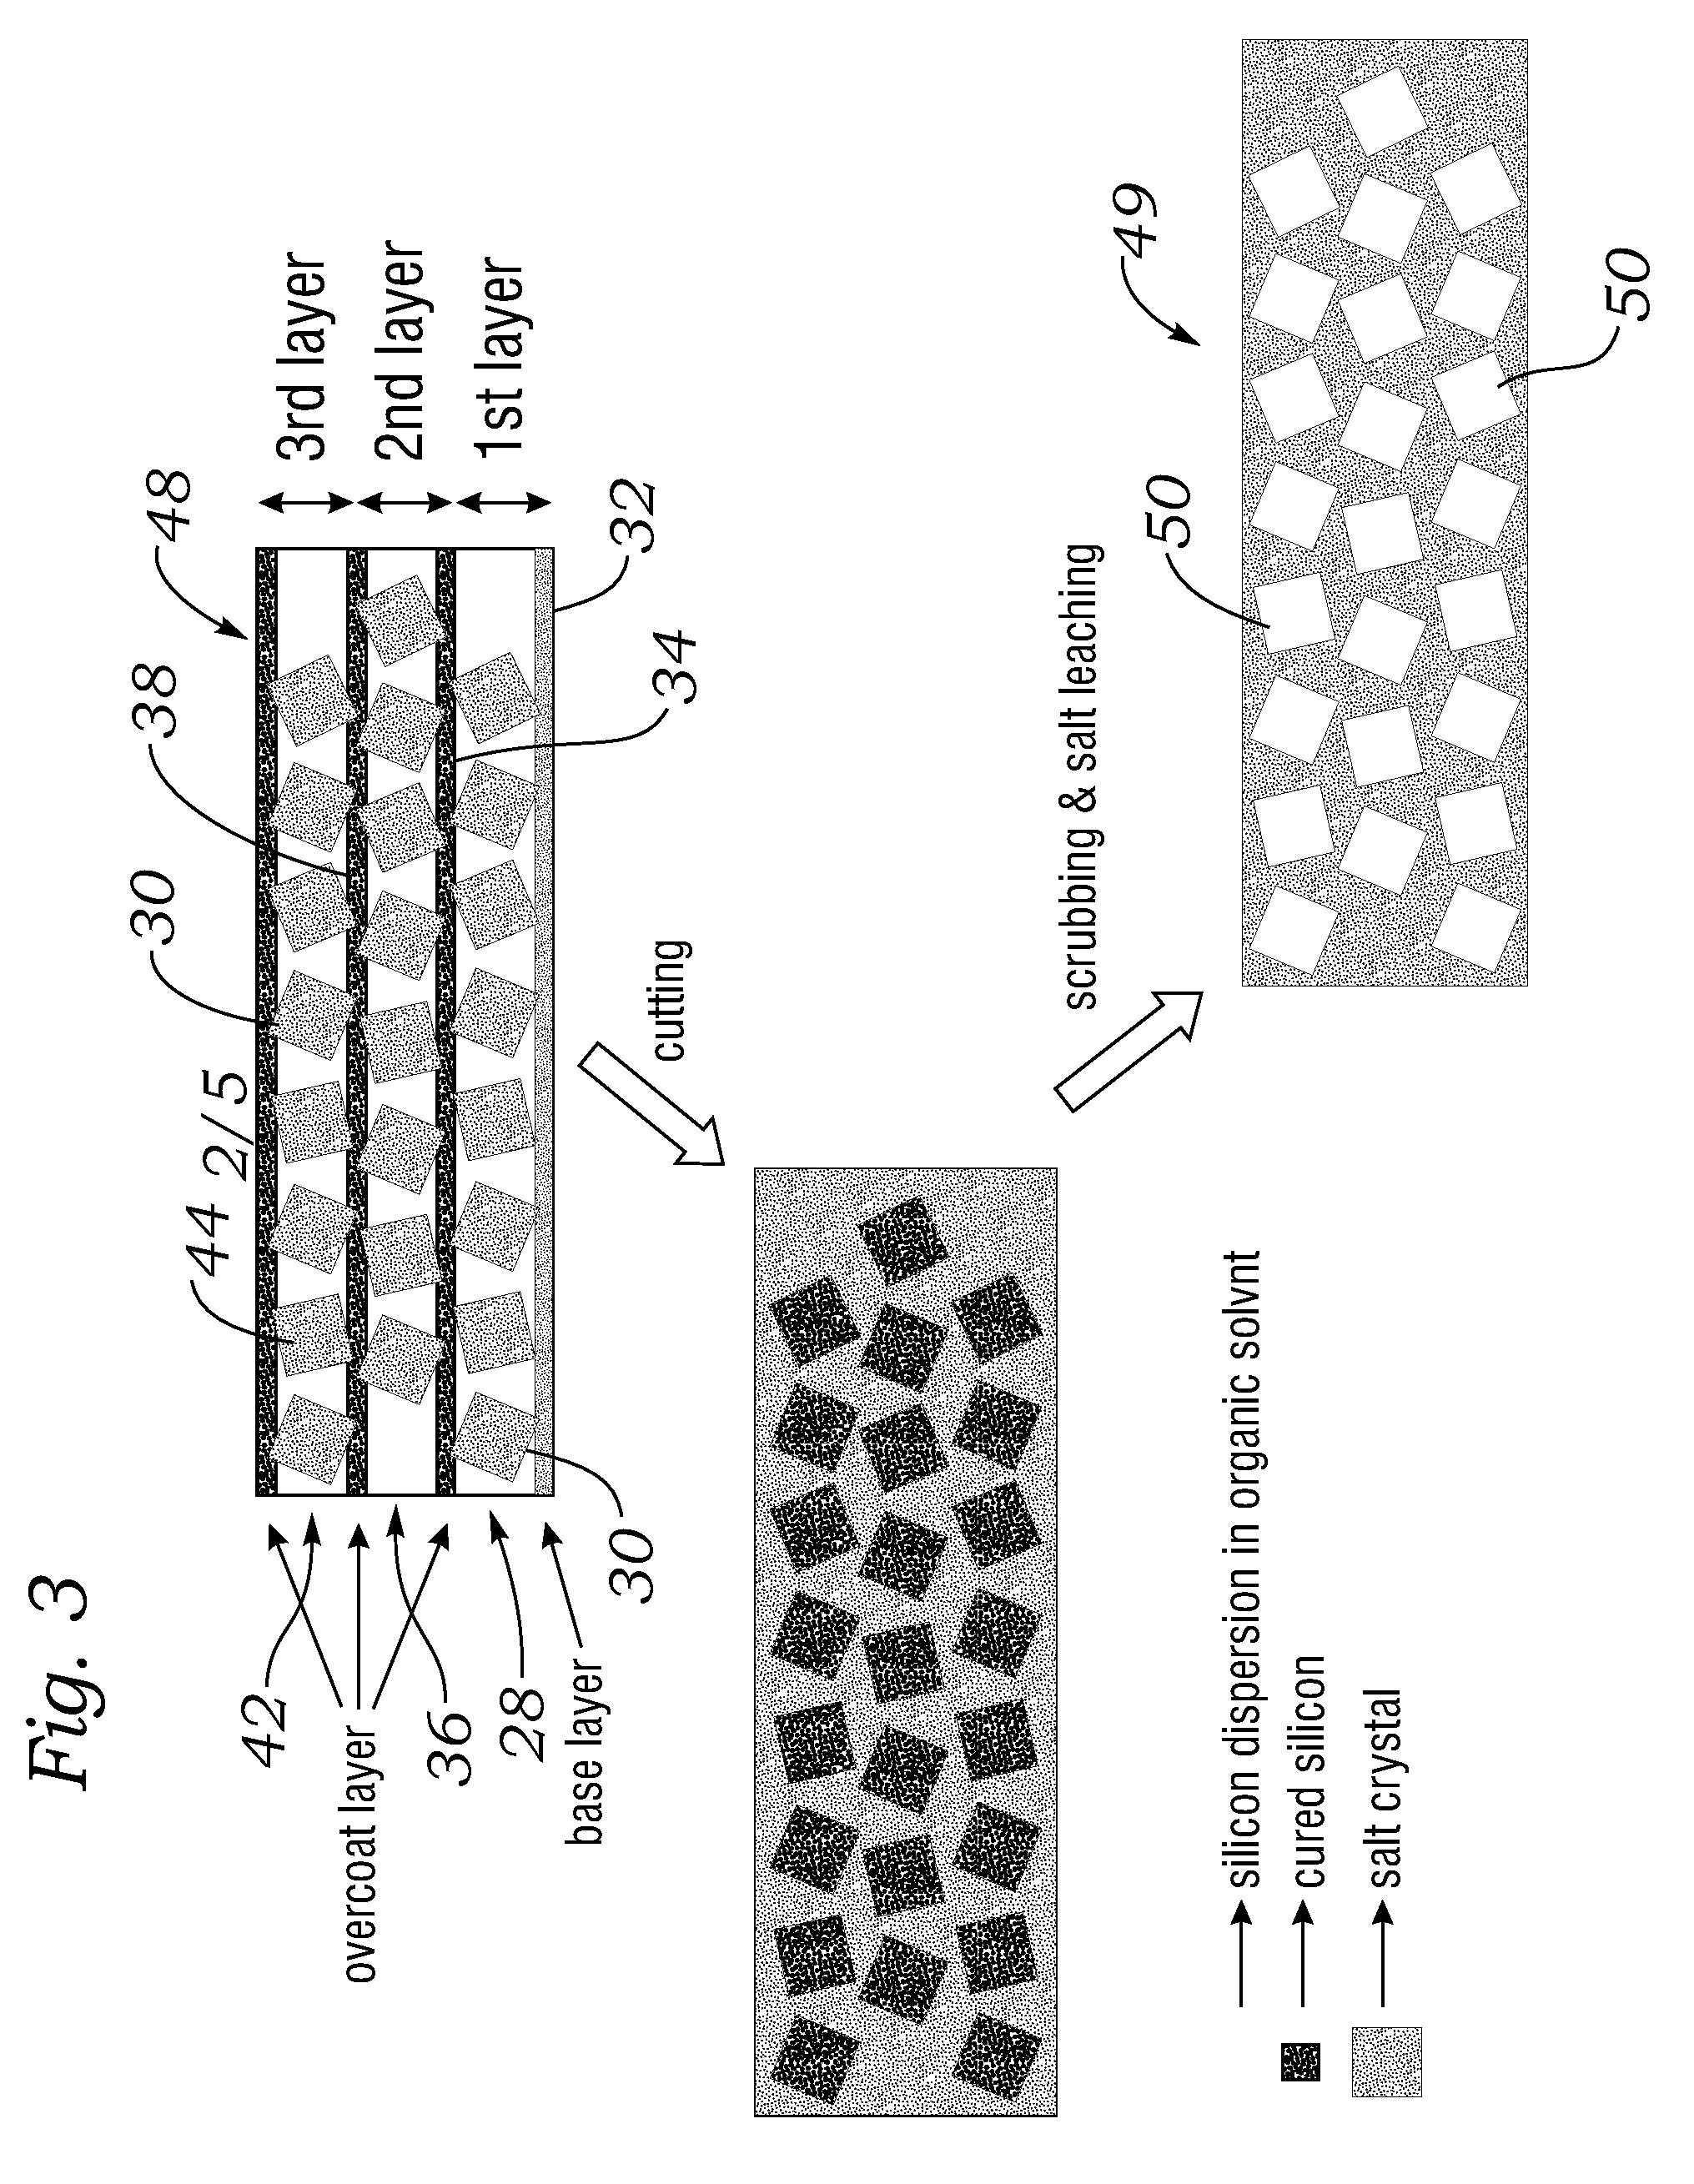 Implants and methods for manufacturing same